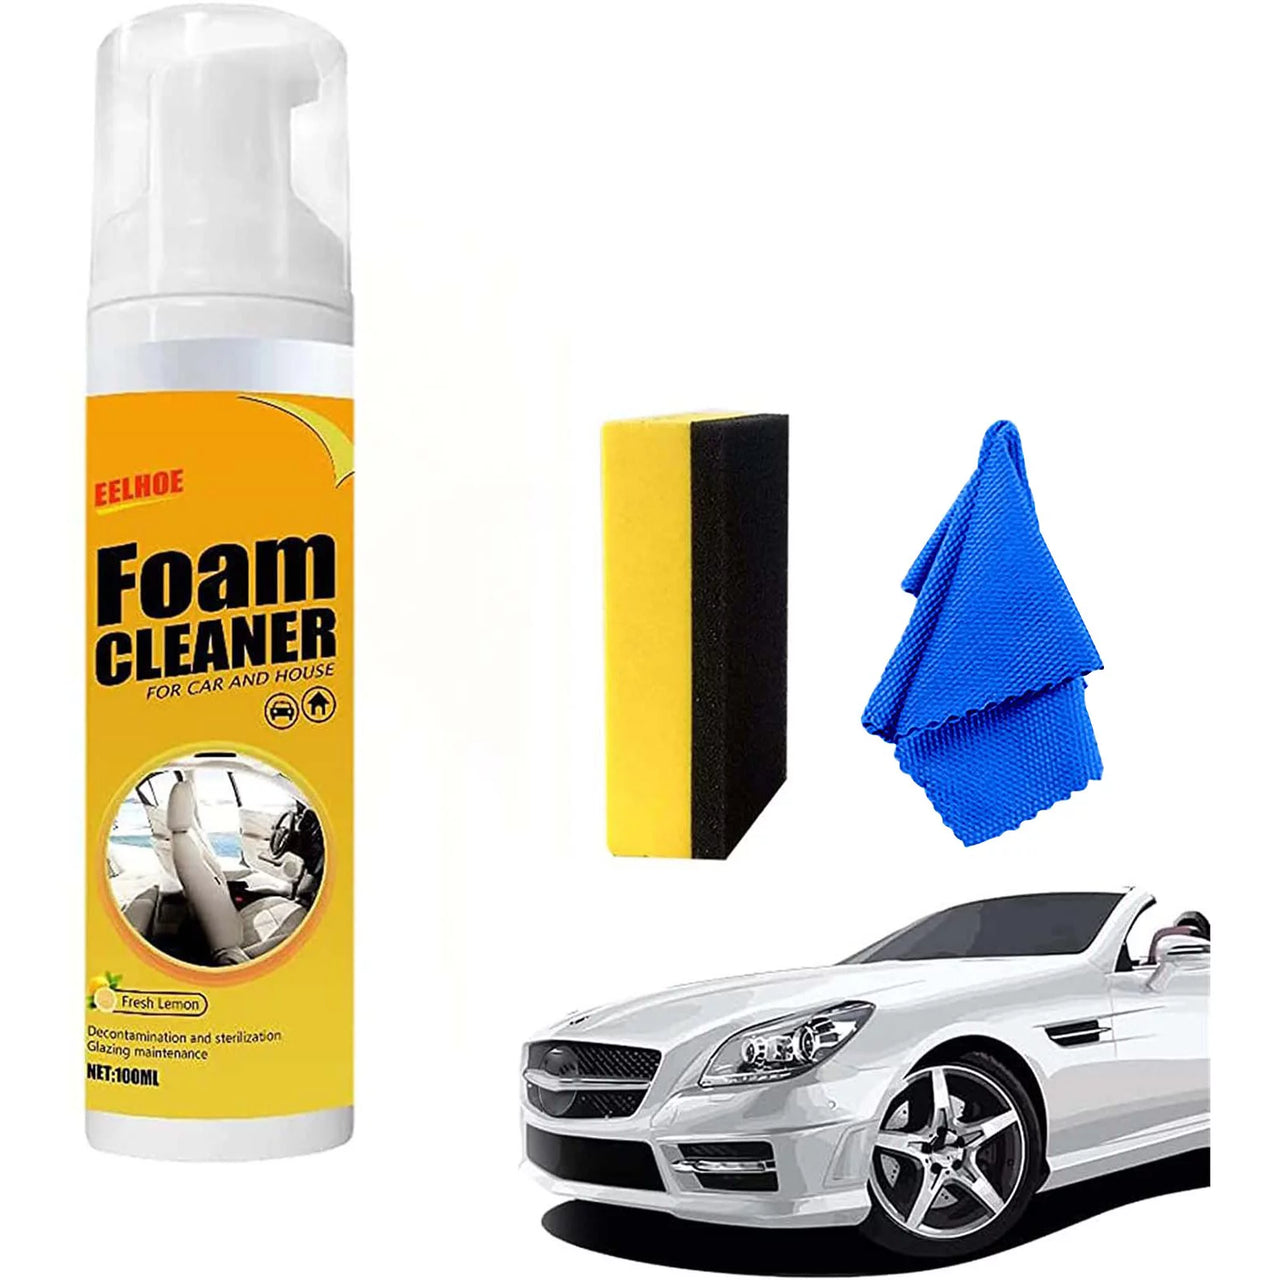 Car Multifunctional Foam Cleaner🔥 The Last Day 50% OFF 🔥